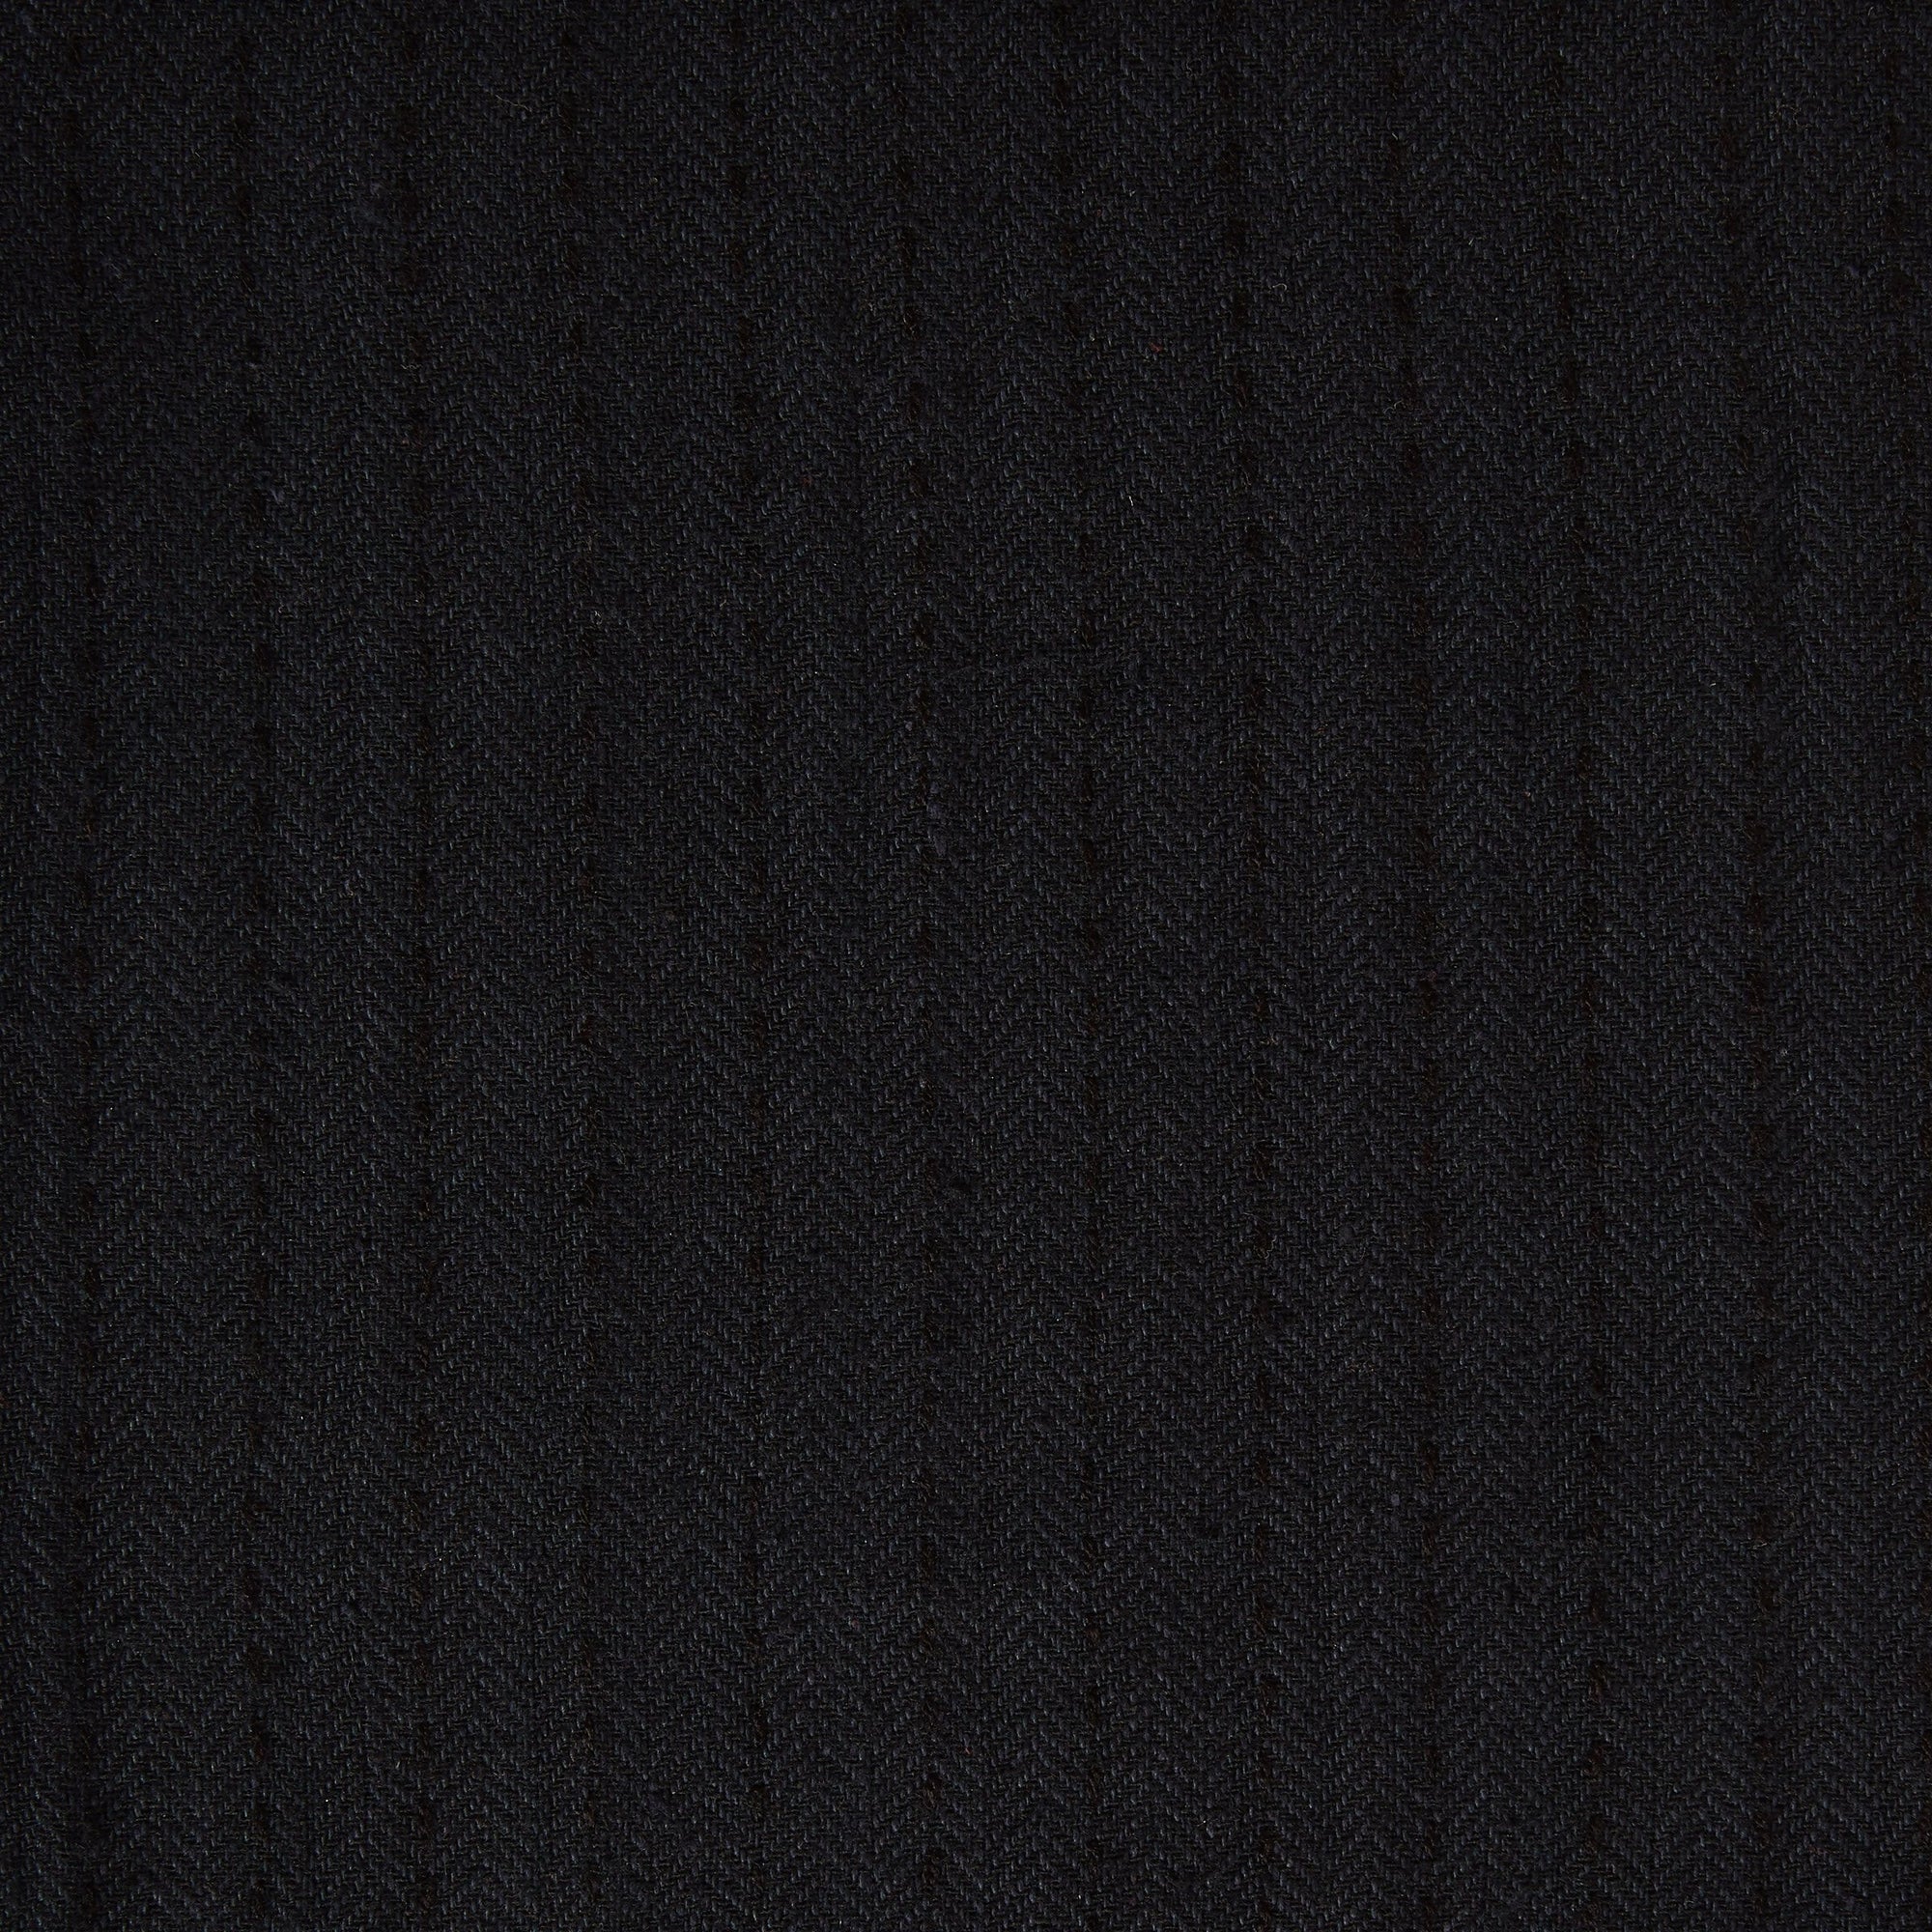 Displaying herringbone a black colored classic patterned all natural viscose and wool blend